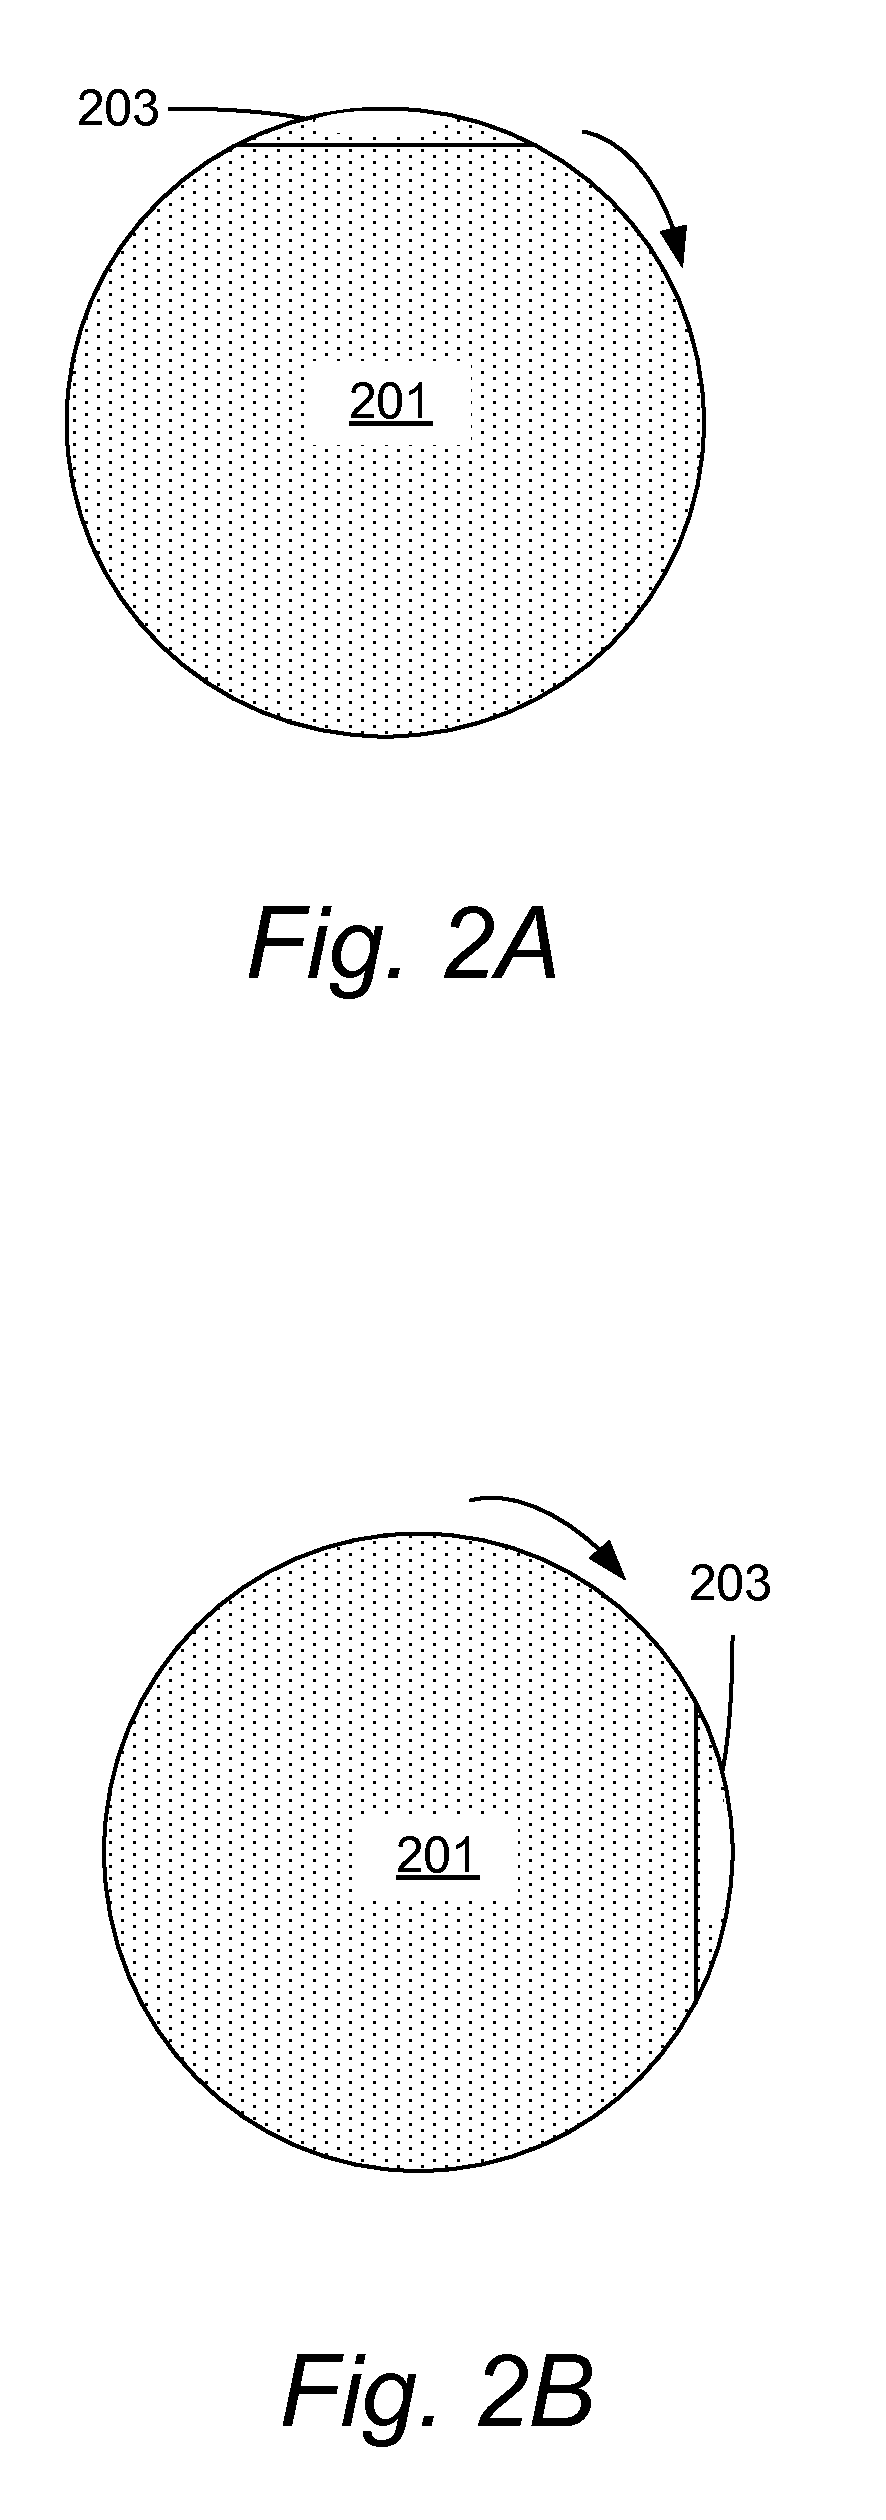 Electroplating apparatus for tailored uniformity profile